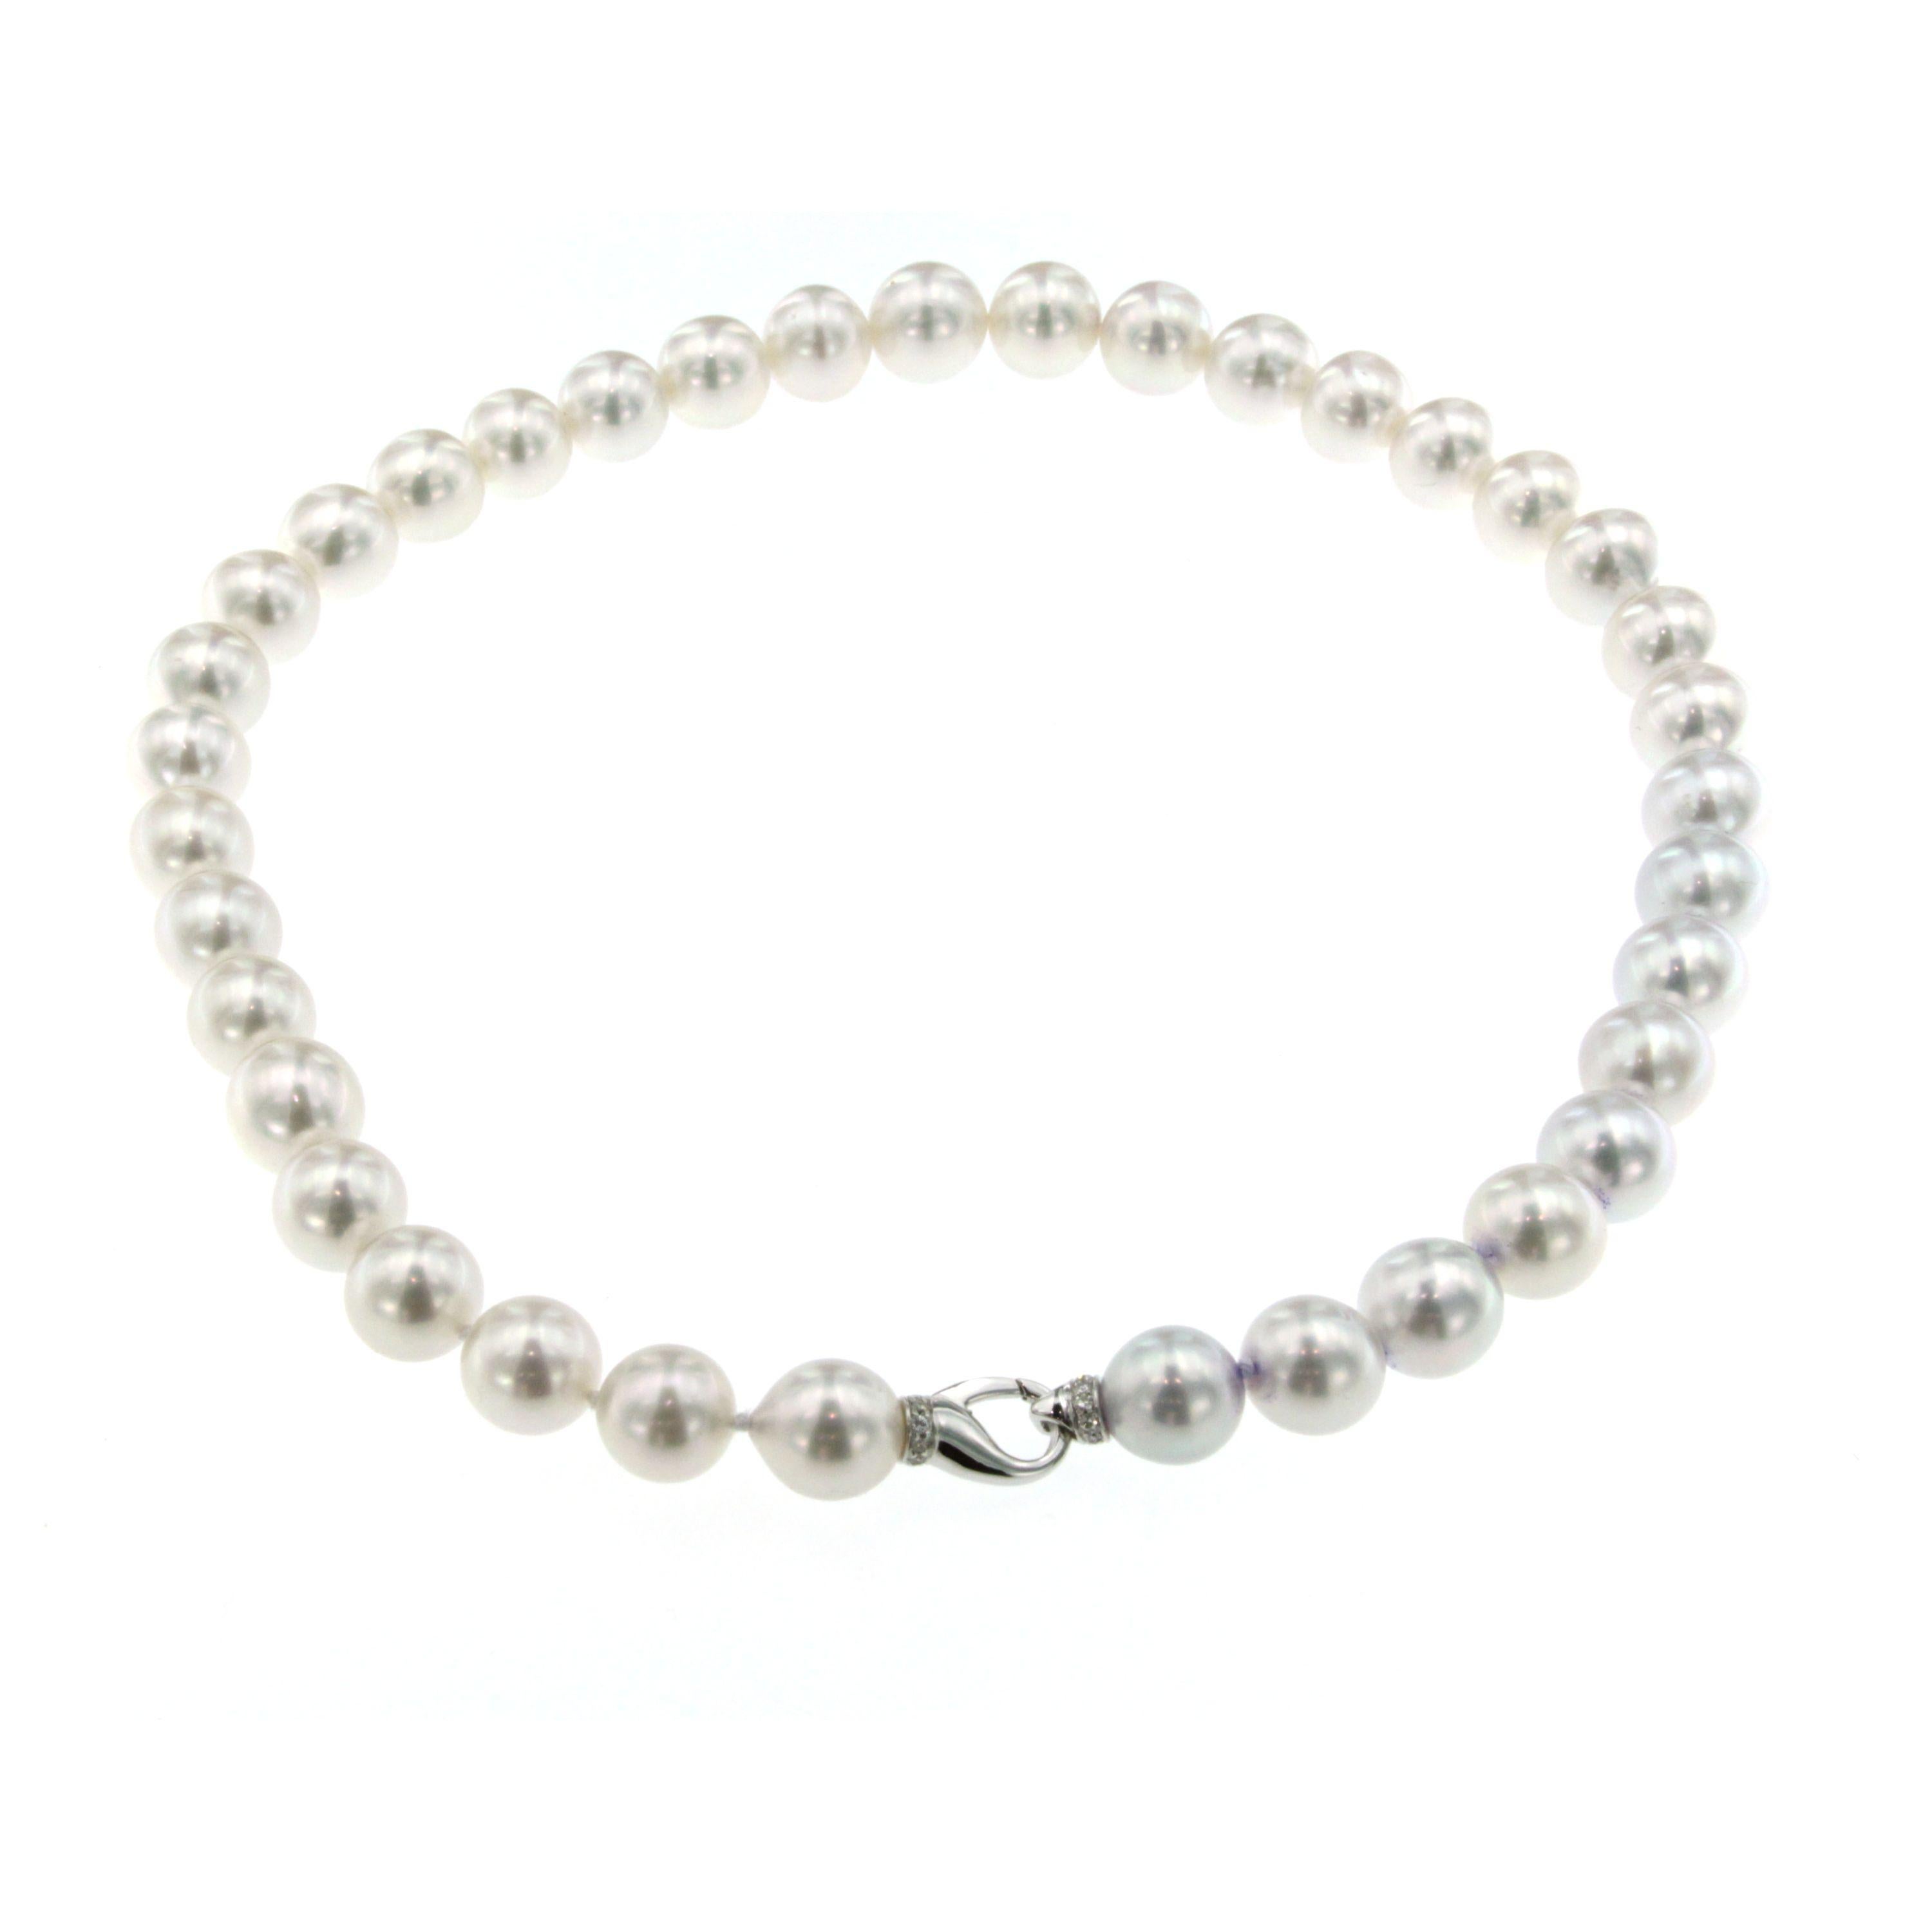 This beautifully crafted pearl necklace features 37 great quality Australian pearls approx. 11mm - 13mm, set with an Elegant 18k white gold and diamond clasp, hallmarked, made in Italy.

CONDITION: Pre-owned - Excellent
MEASURES: 16.93 in (43